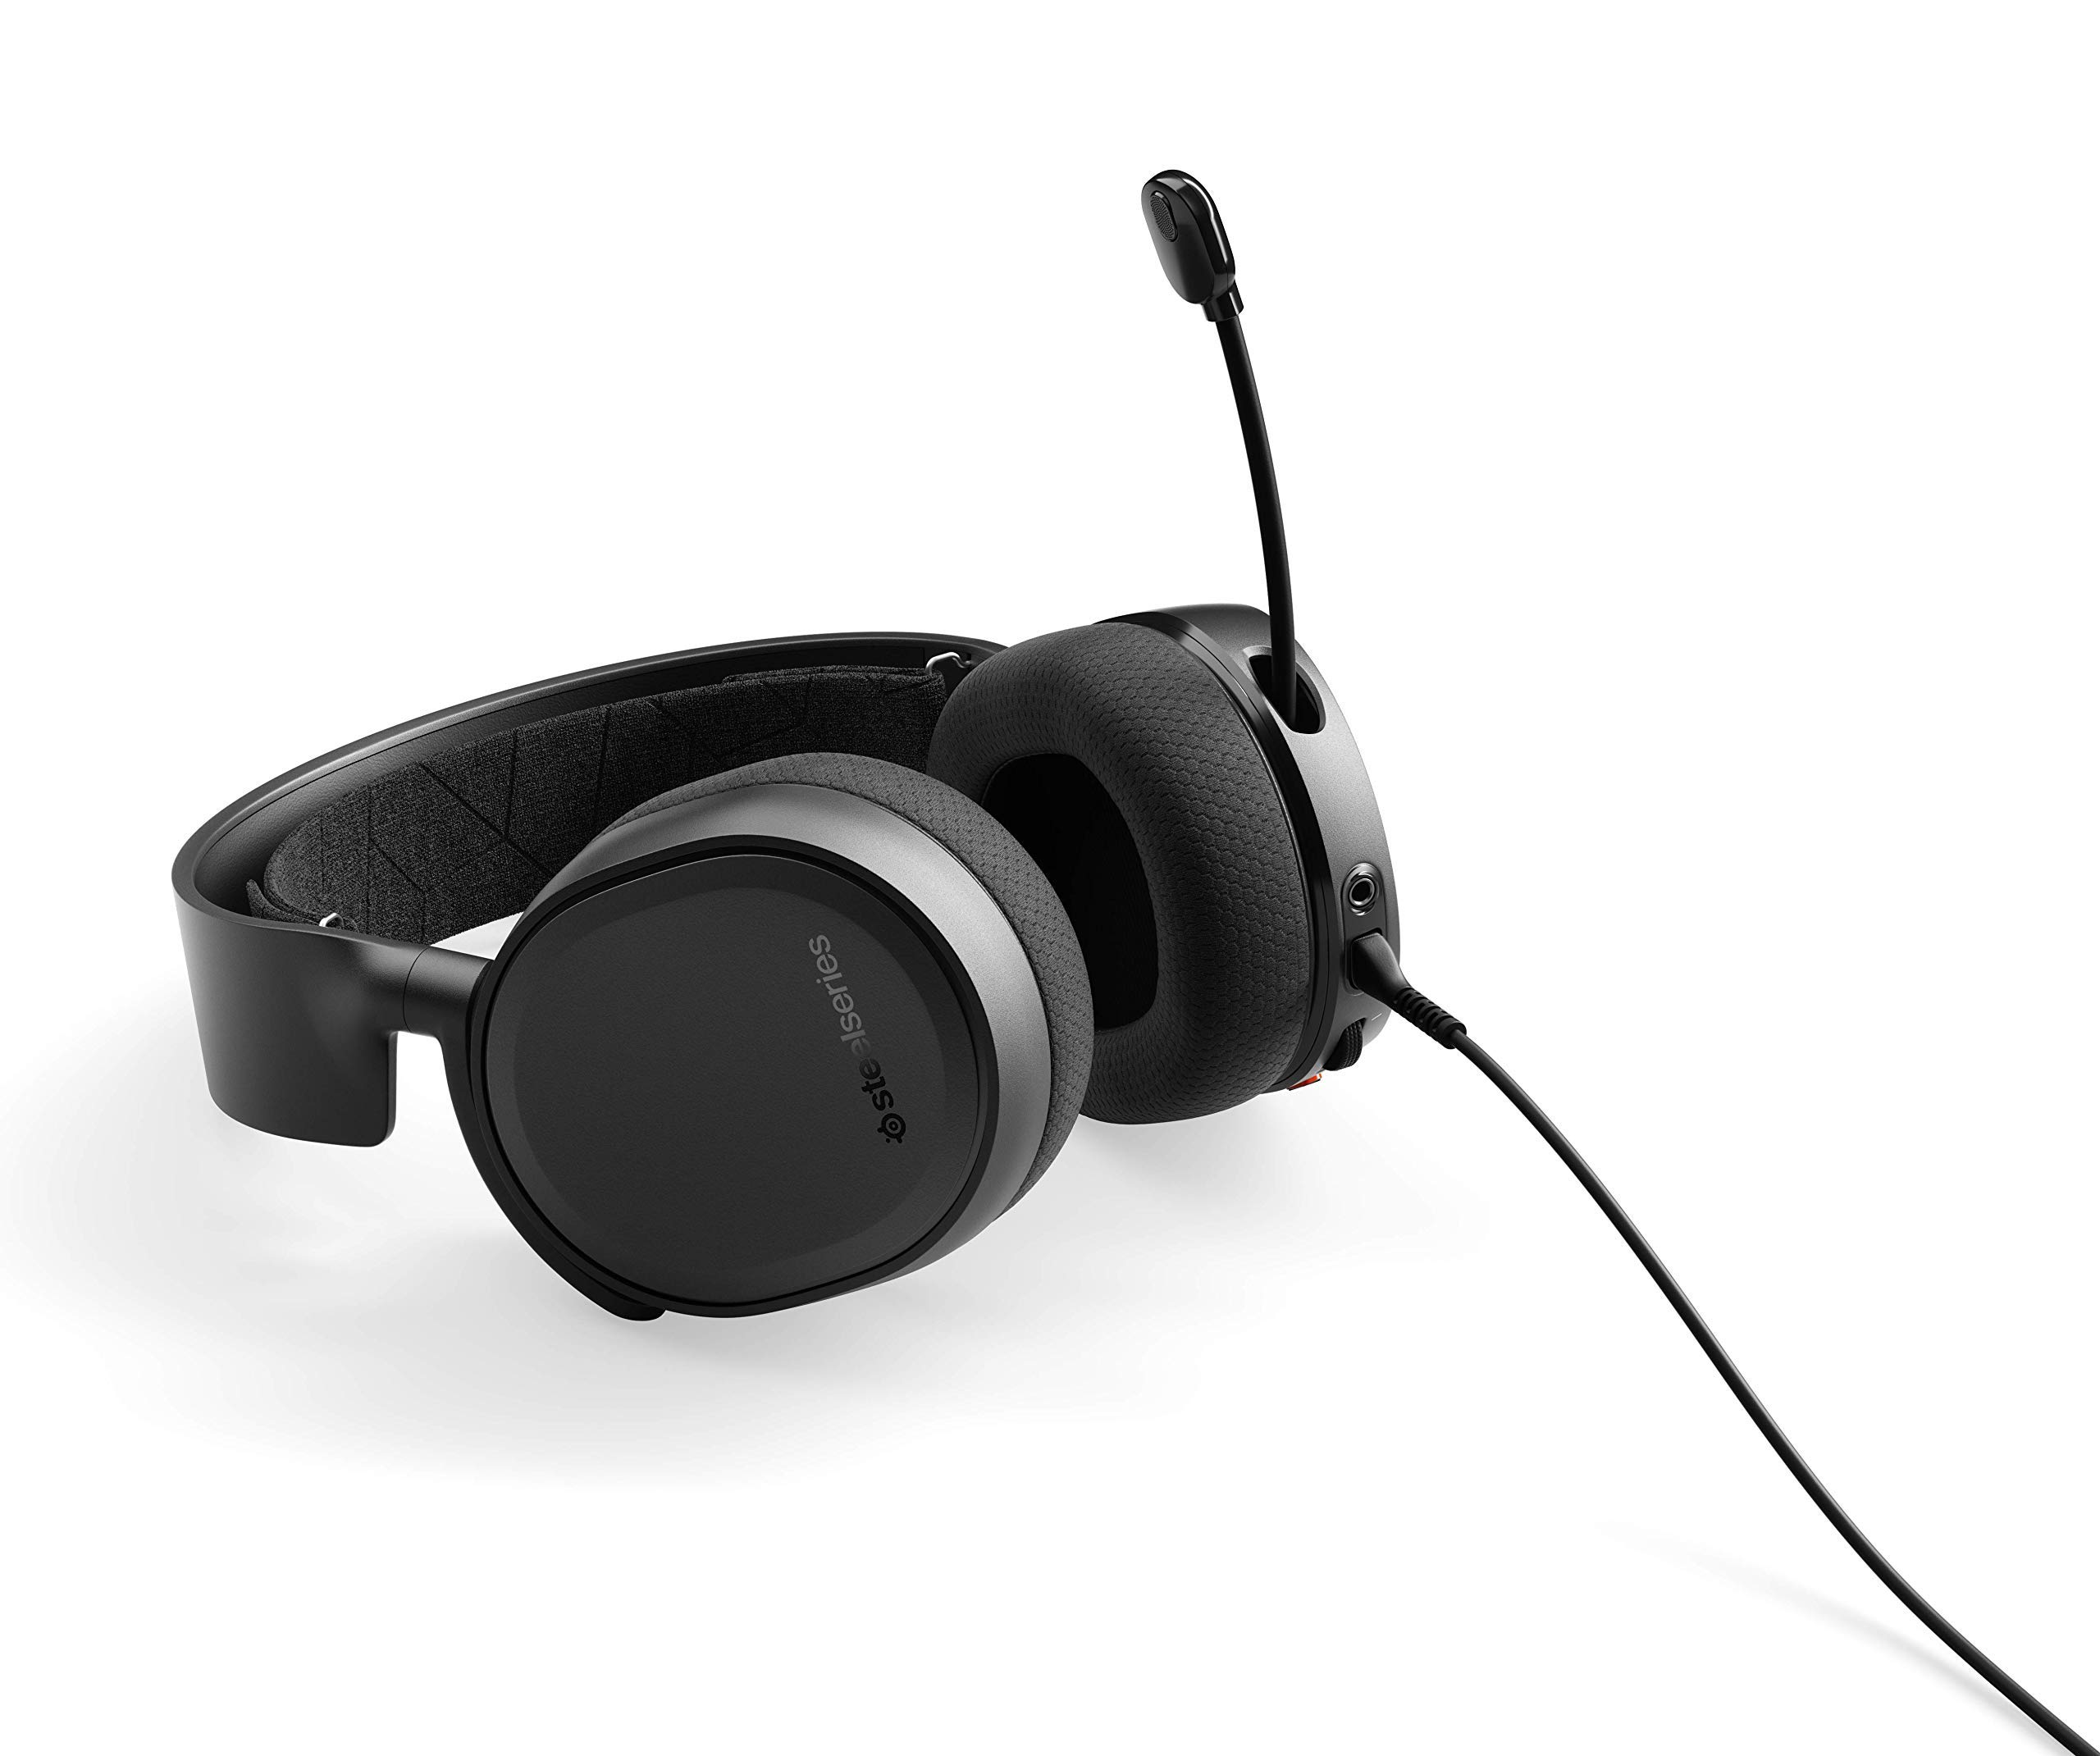 steelseries Arctis 3 (2019 Edition) All-Platform Gaming Headset for PC, PlayStation 4, Xbox One, Nintendo Switch, VR, Android, and iOS - Black (Renewed)